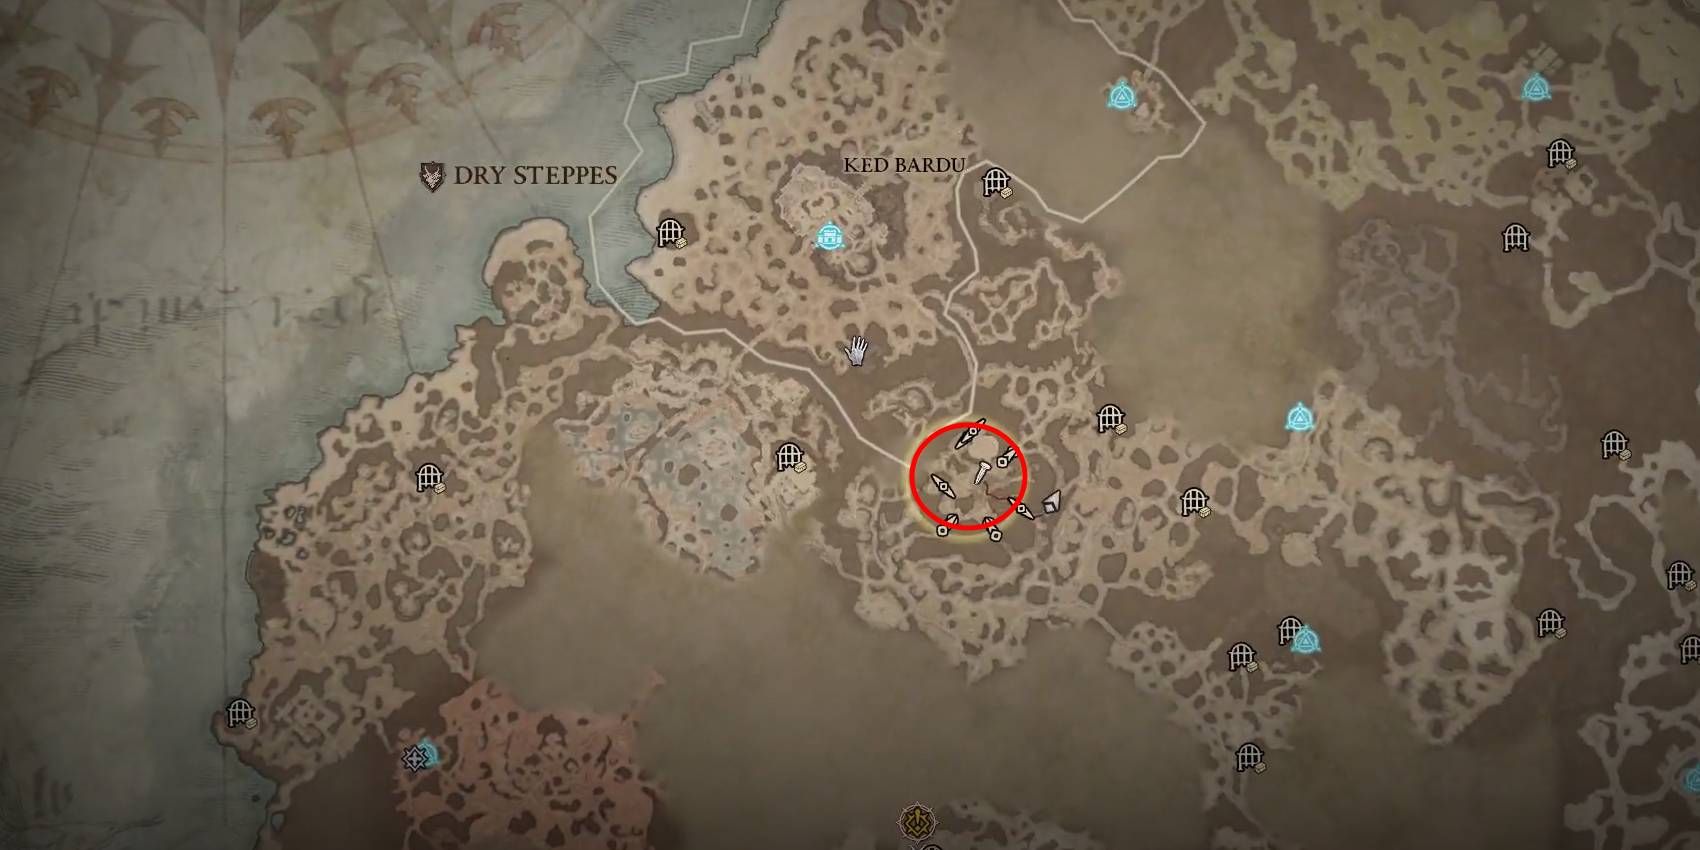 Diablo 4 Dry Steppes The Onyx Watchtower Stronghold Location on Map Marked by Red Circle